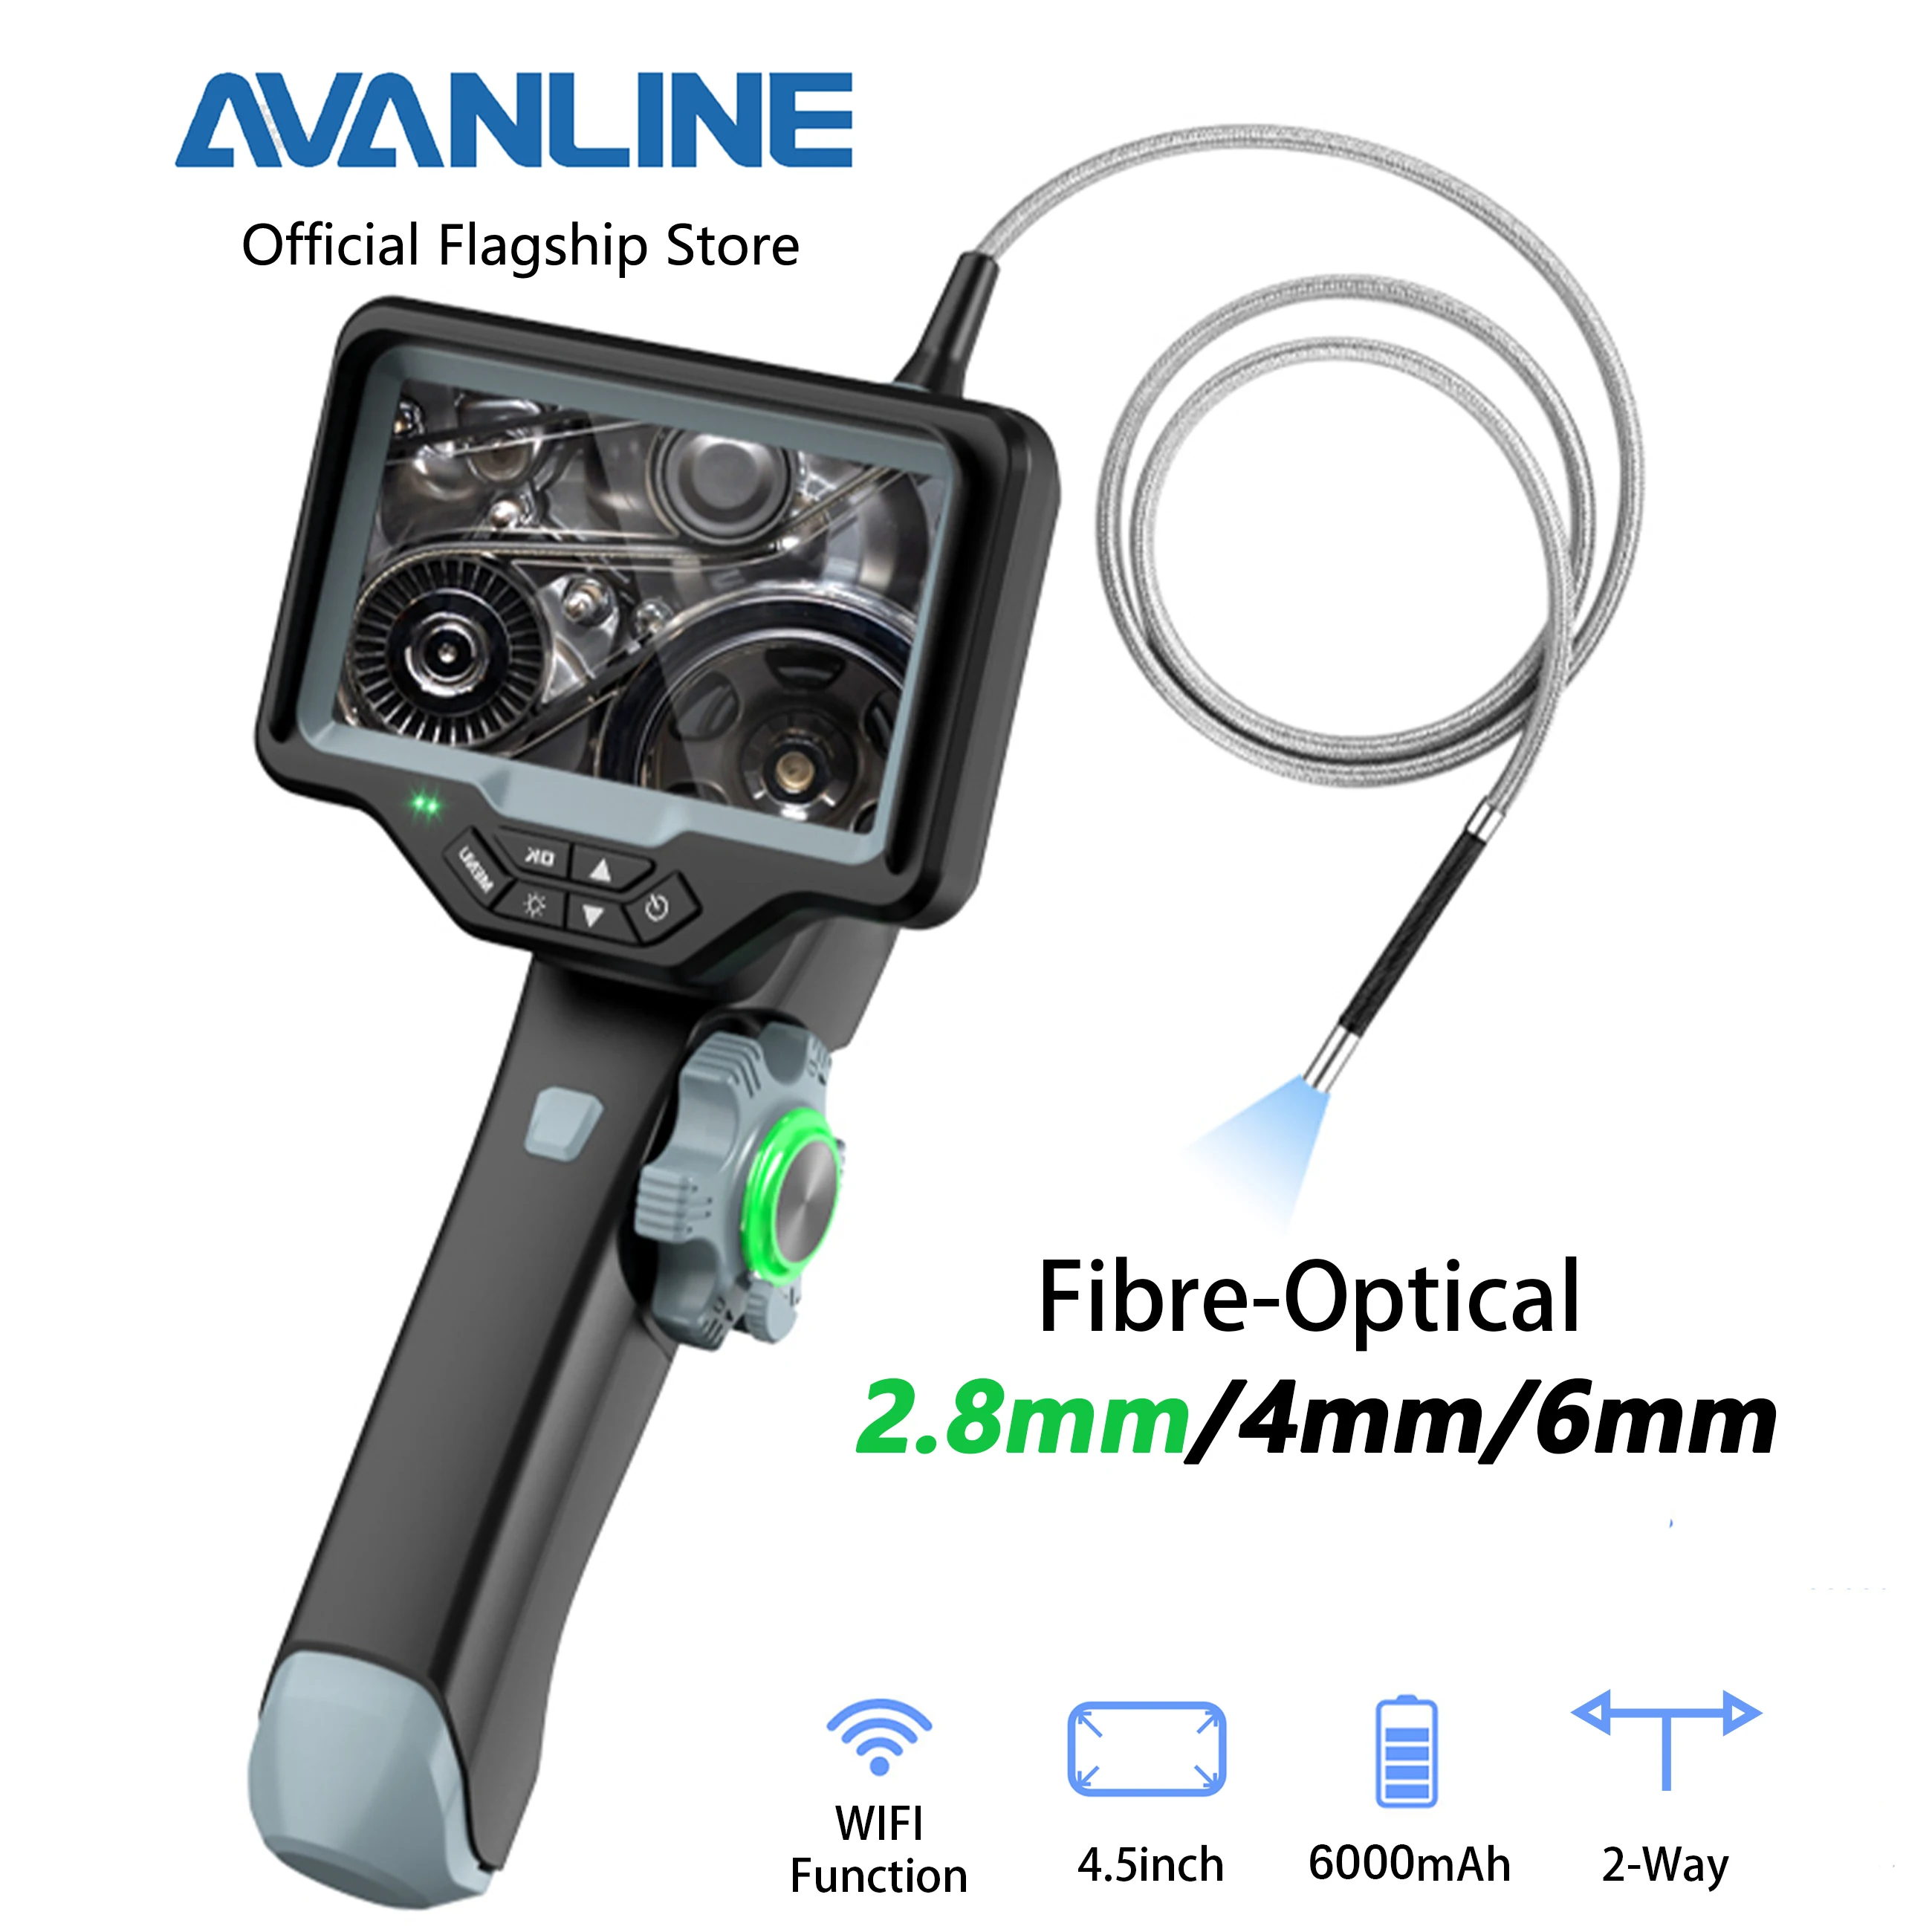 AVANLINE 2.8mm Fibre-optical Articulating Borescope 4.5inch 2way Industrial Endoscope WIFI function Thermostability 1M main product image